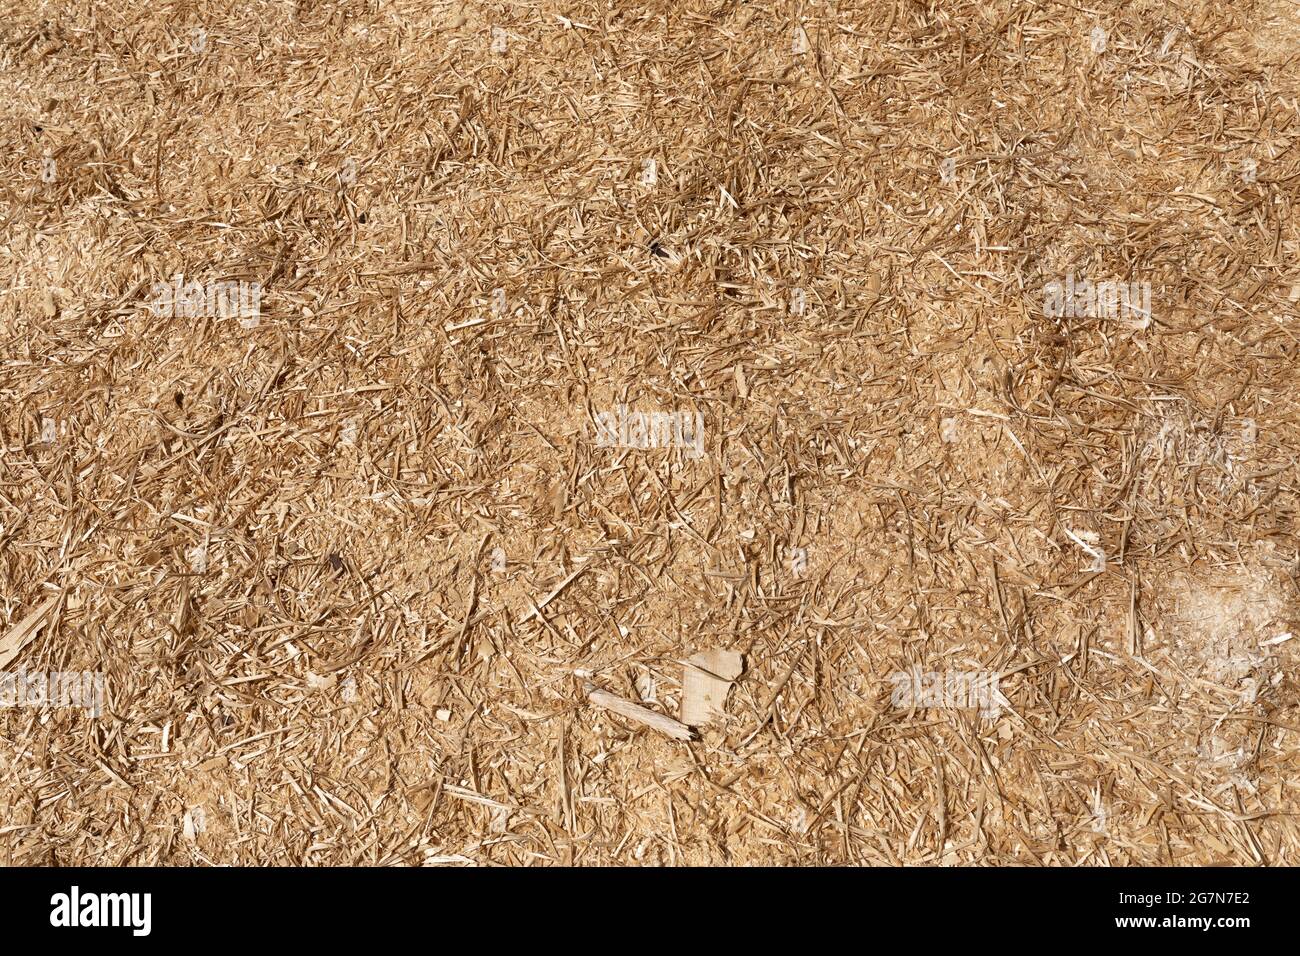 texture from sawdust from the wood industry Stock Photo